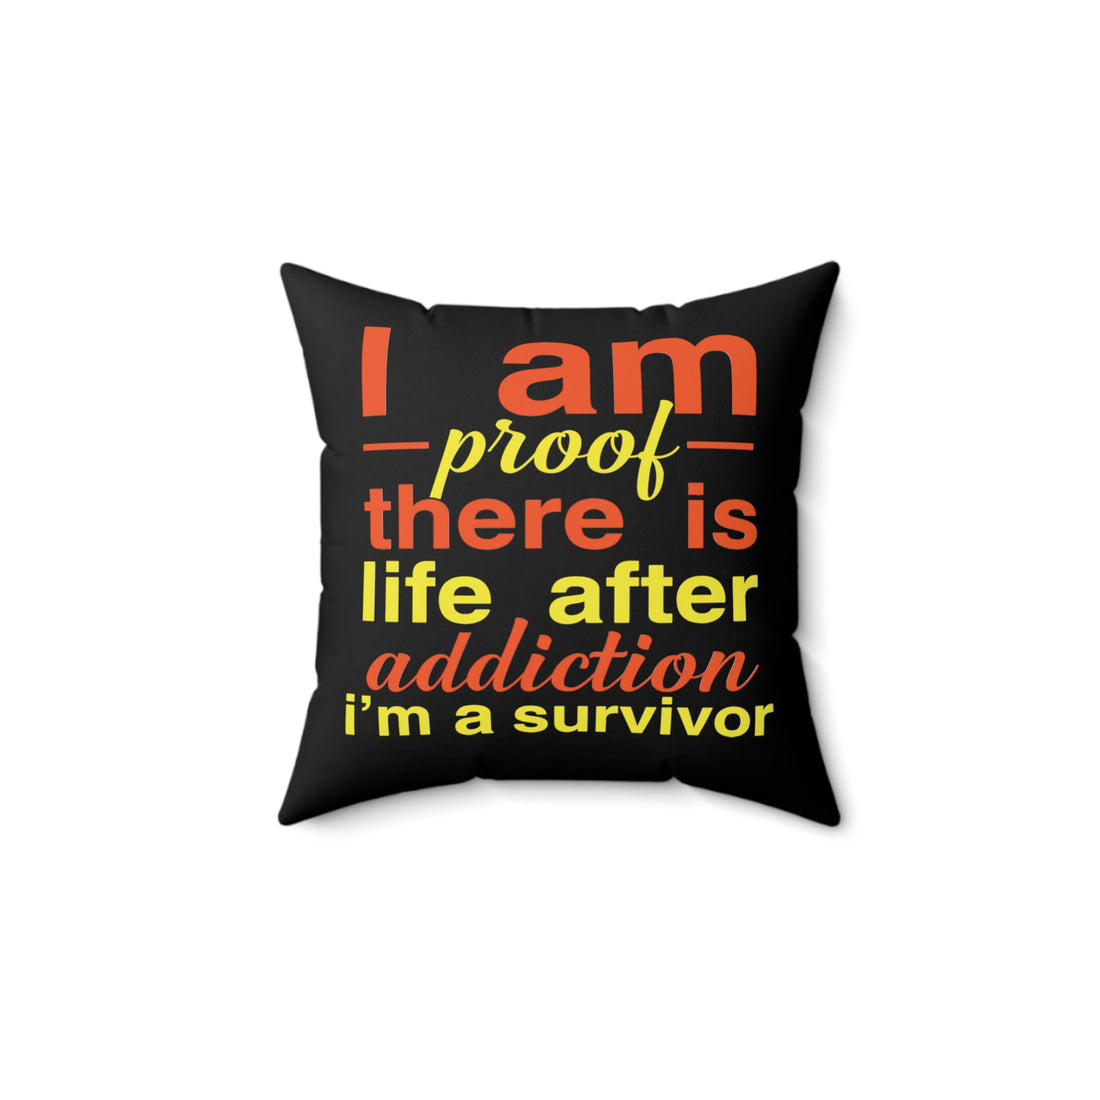 I Am Proof There Is Life After Addiction -  Black Pillow